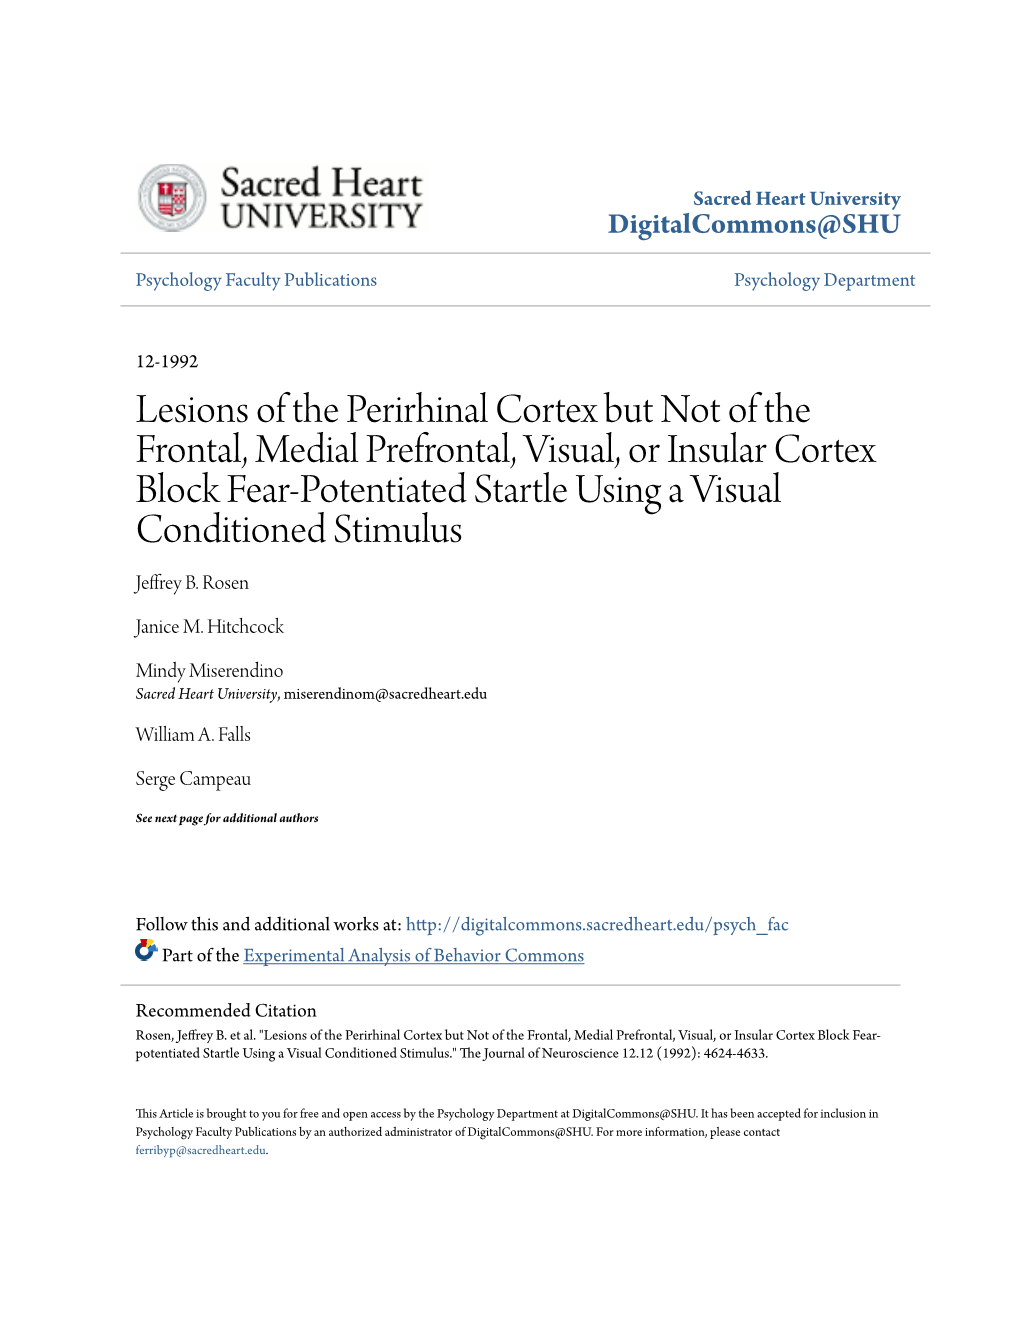 Lesions of the Perirhinal Cortex but Not of the Frontal, Medial Prefrontal, Visual, Or Insular Cortex Block Fear-Potentiated